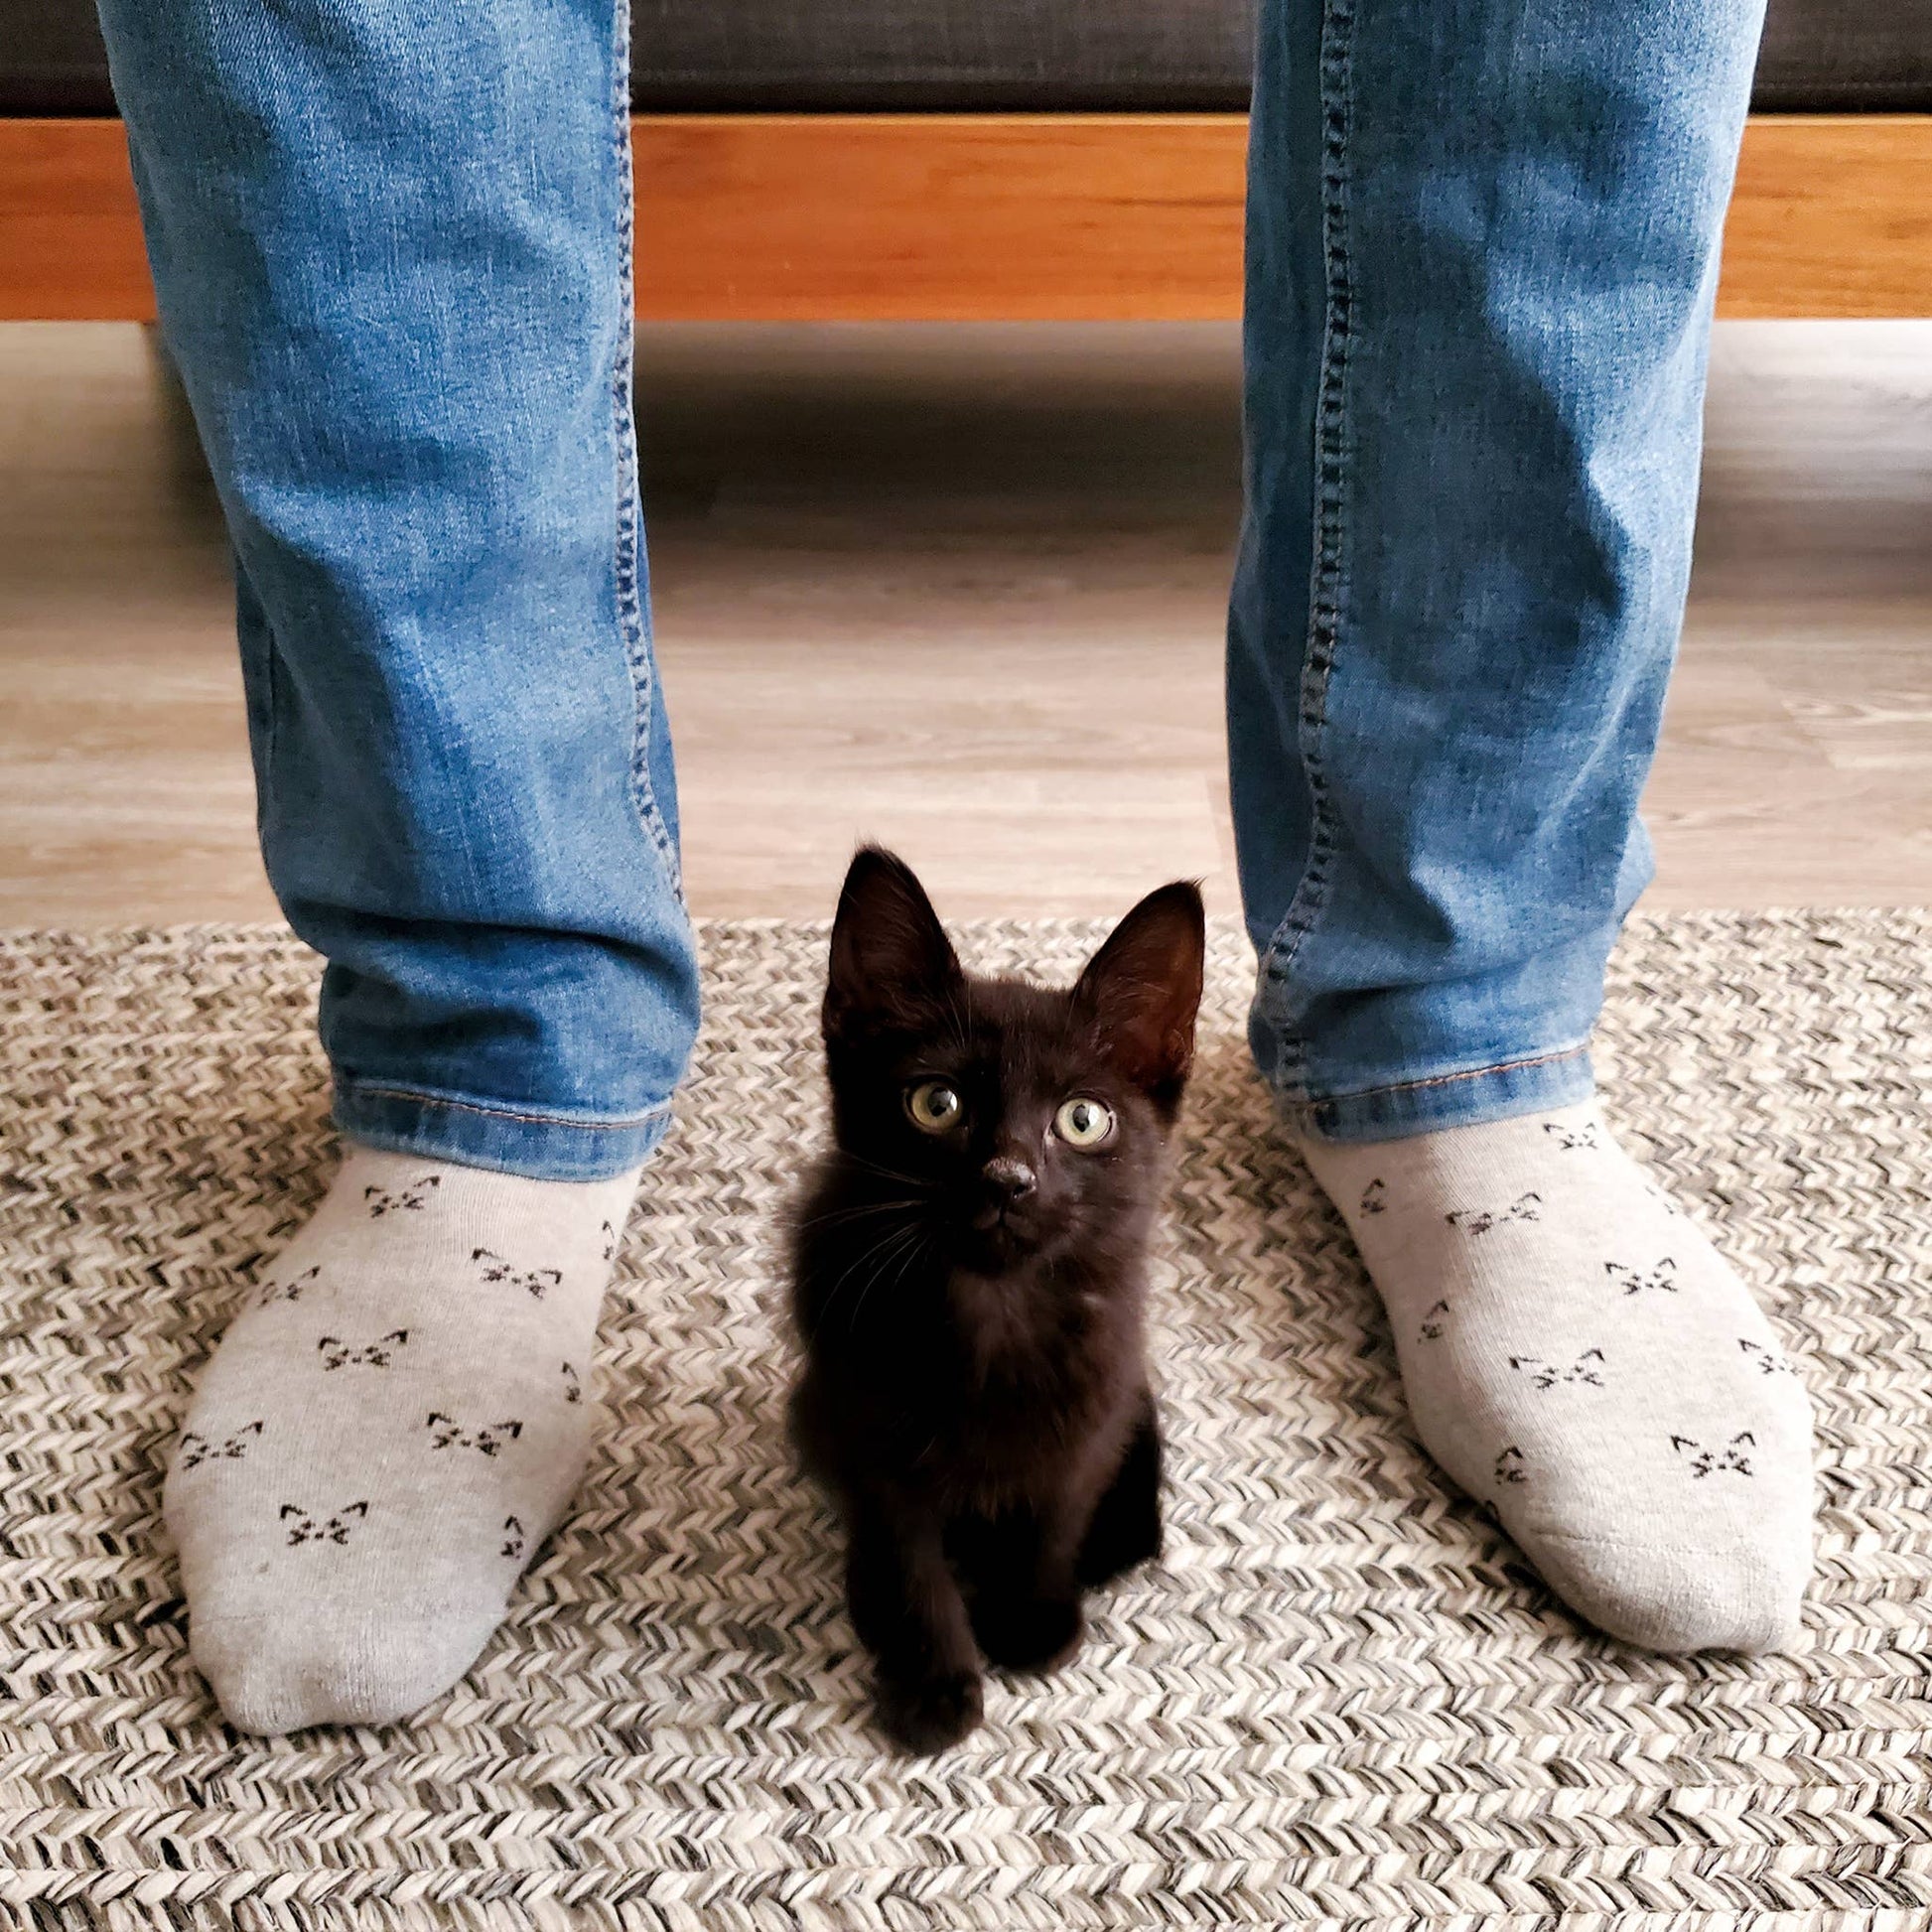 Conscious Step - Socks that Save Cats (Gray Cats)  Conscious Step   -better made easy-eco-friendly-sustainable-gifting